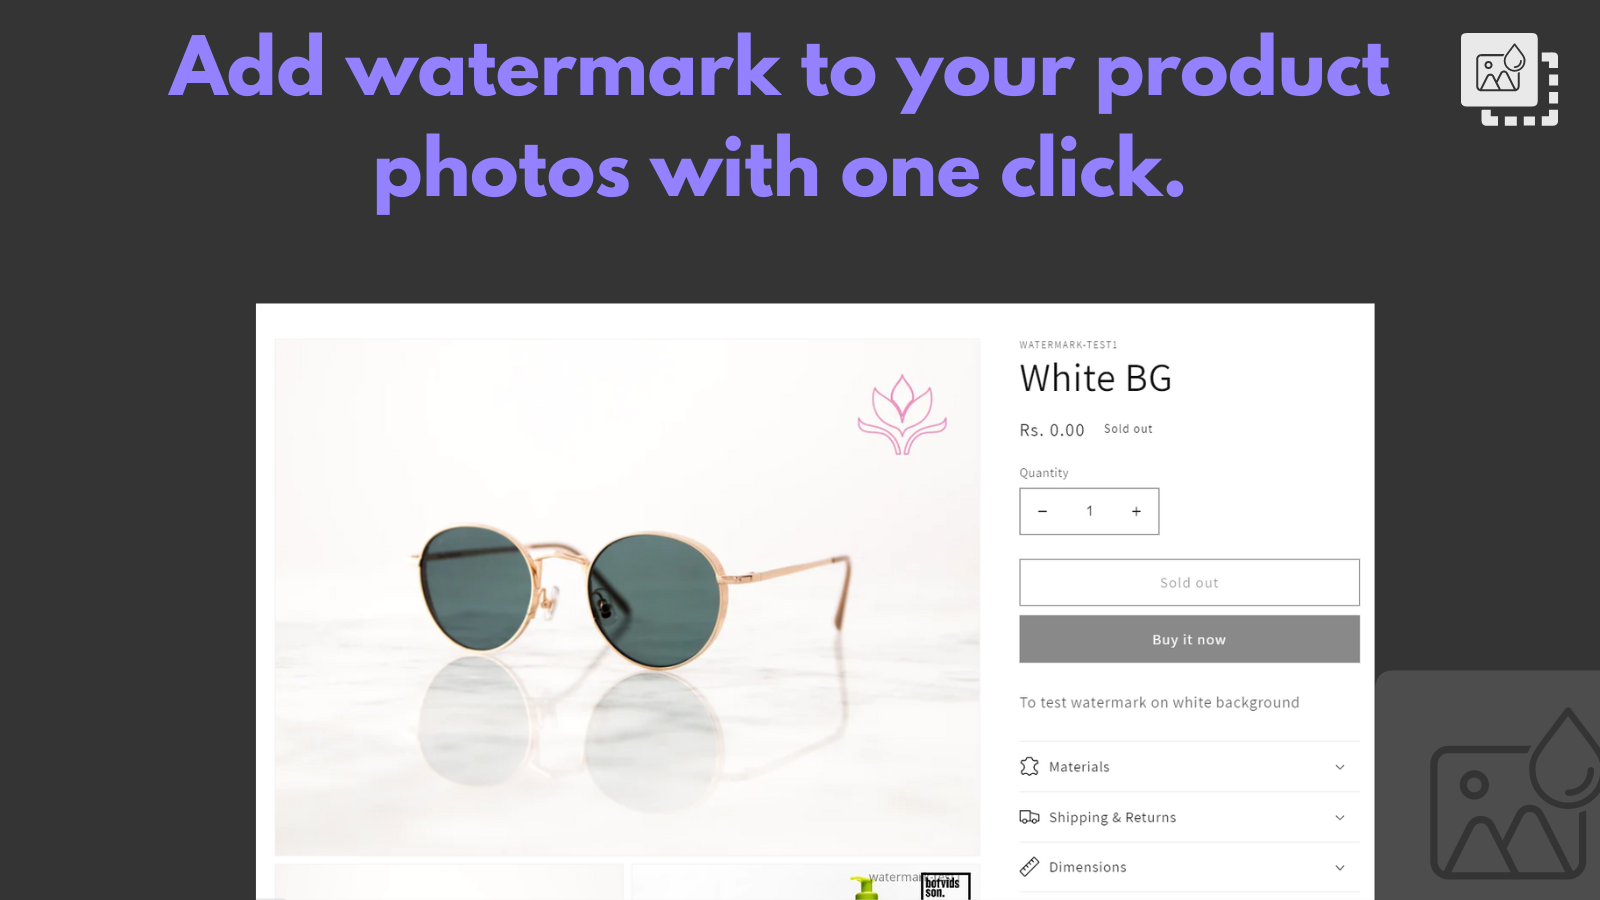 Watermark on product photos